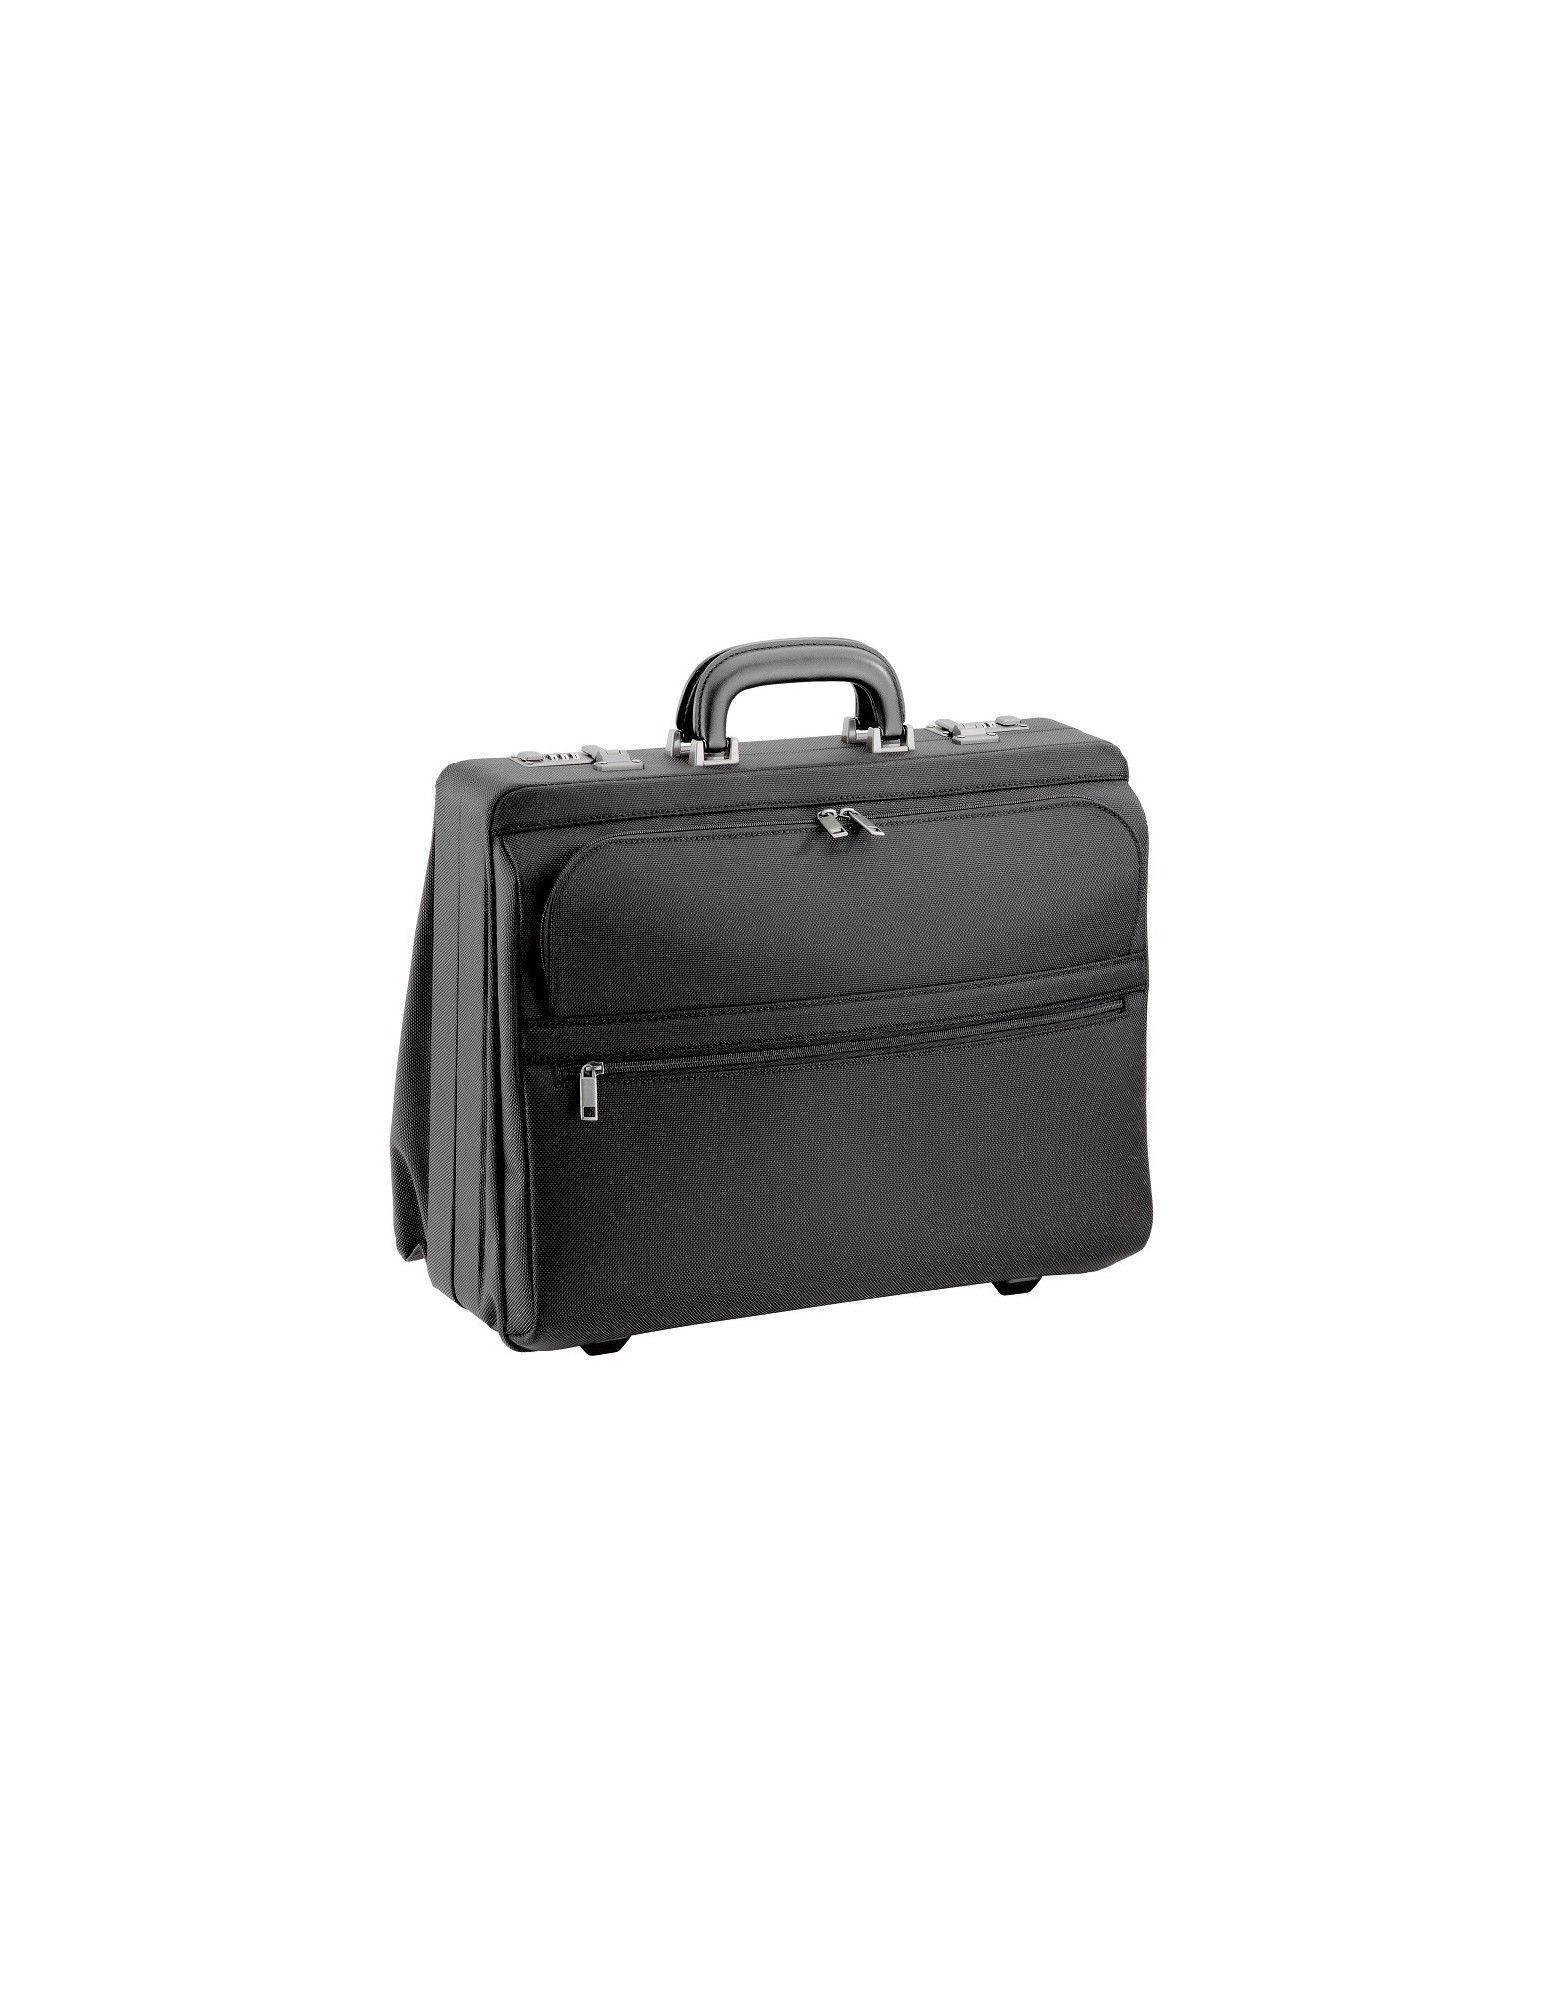 D & N briefcase with compartments 2649